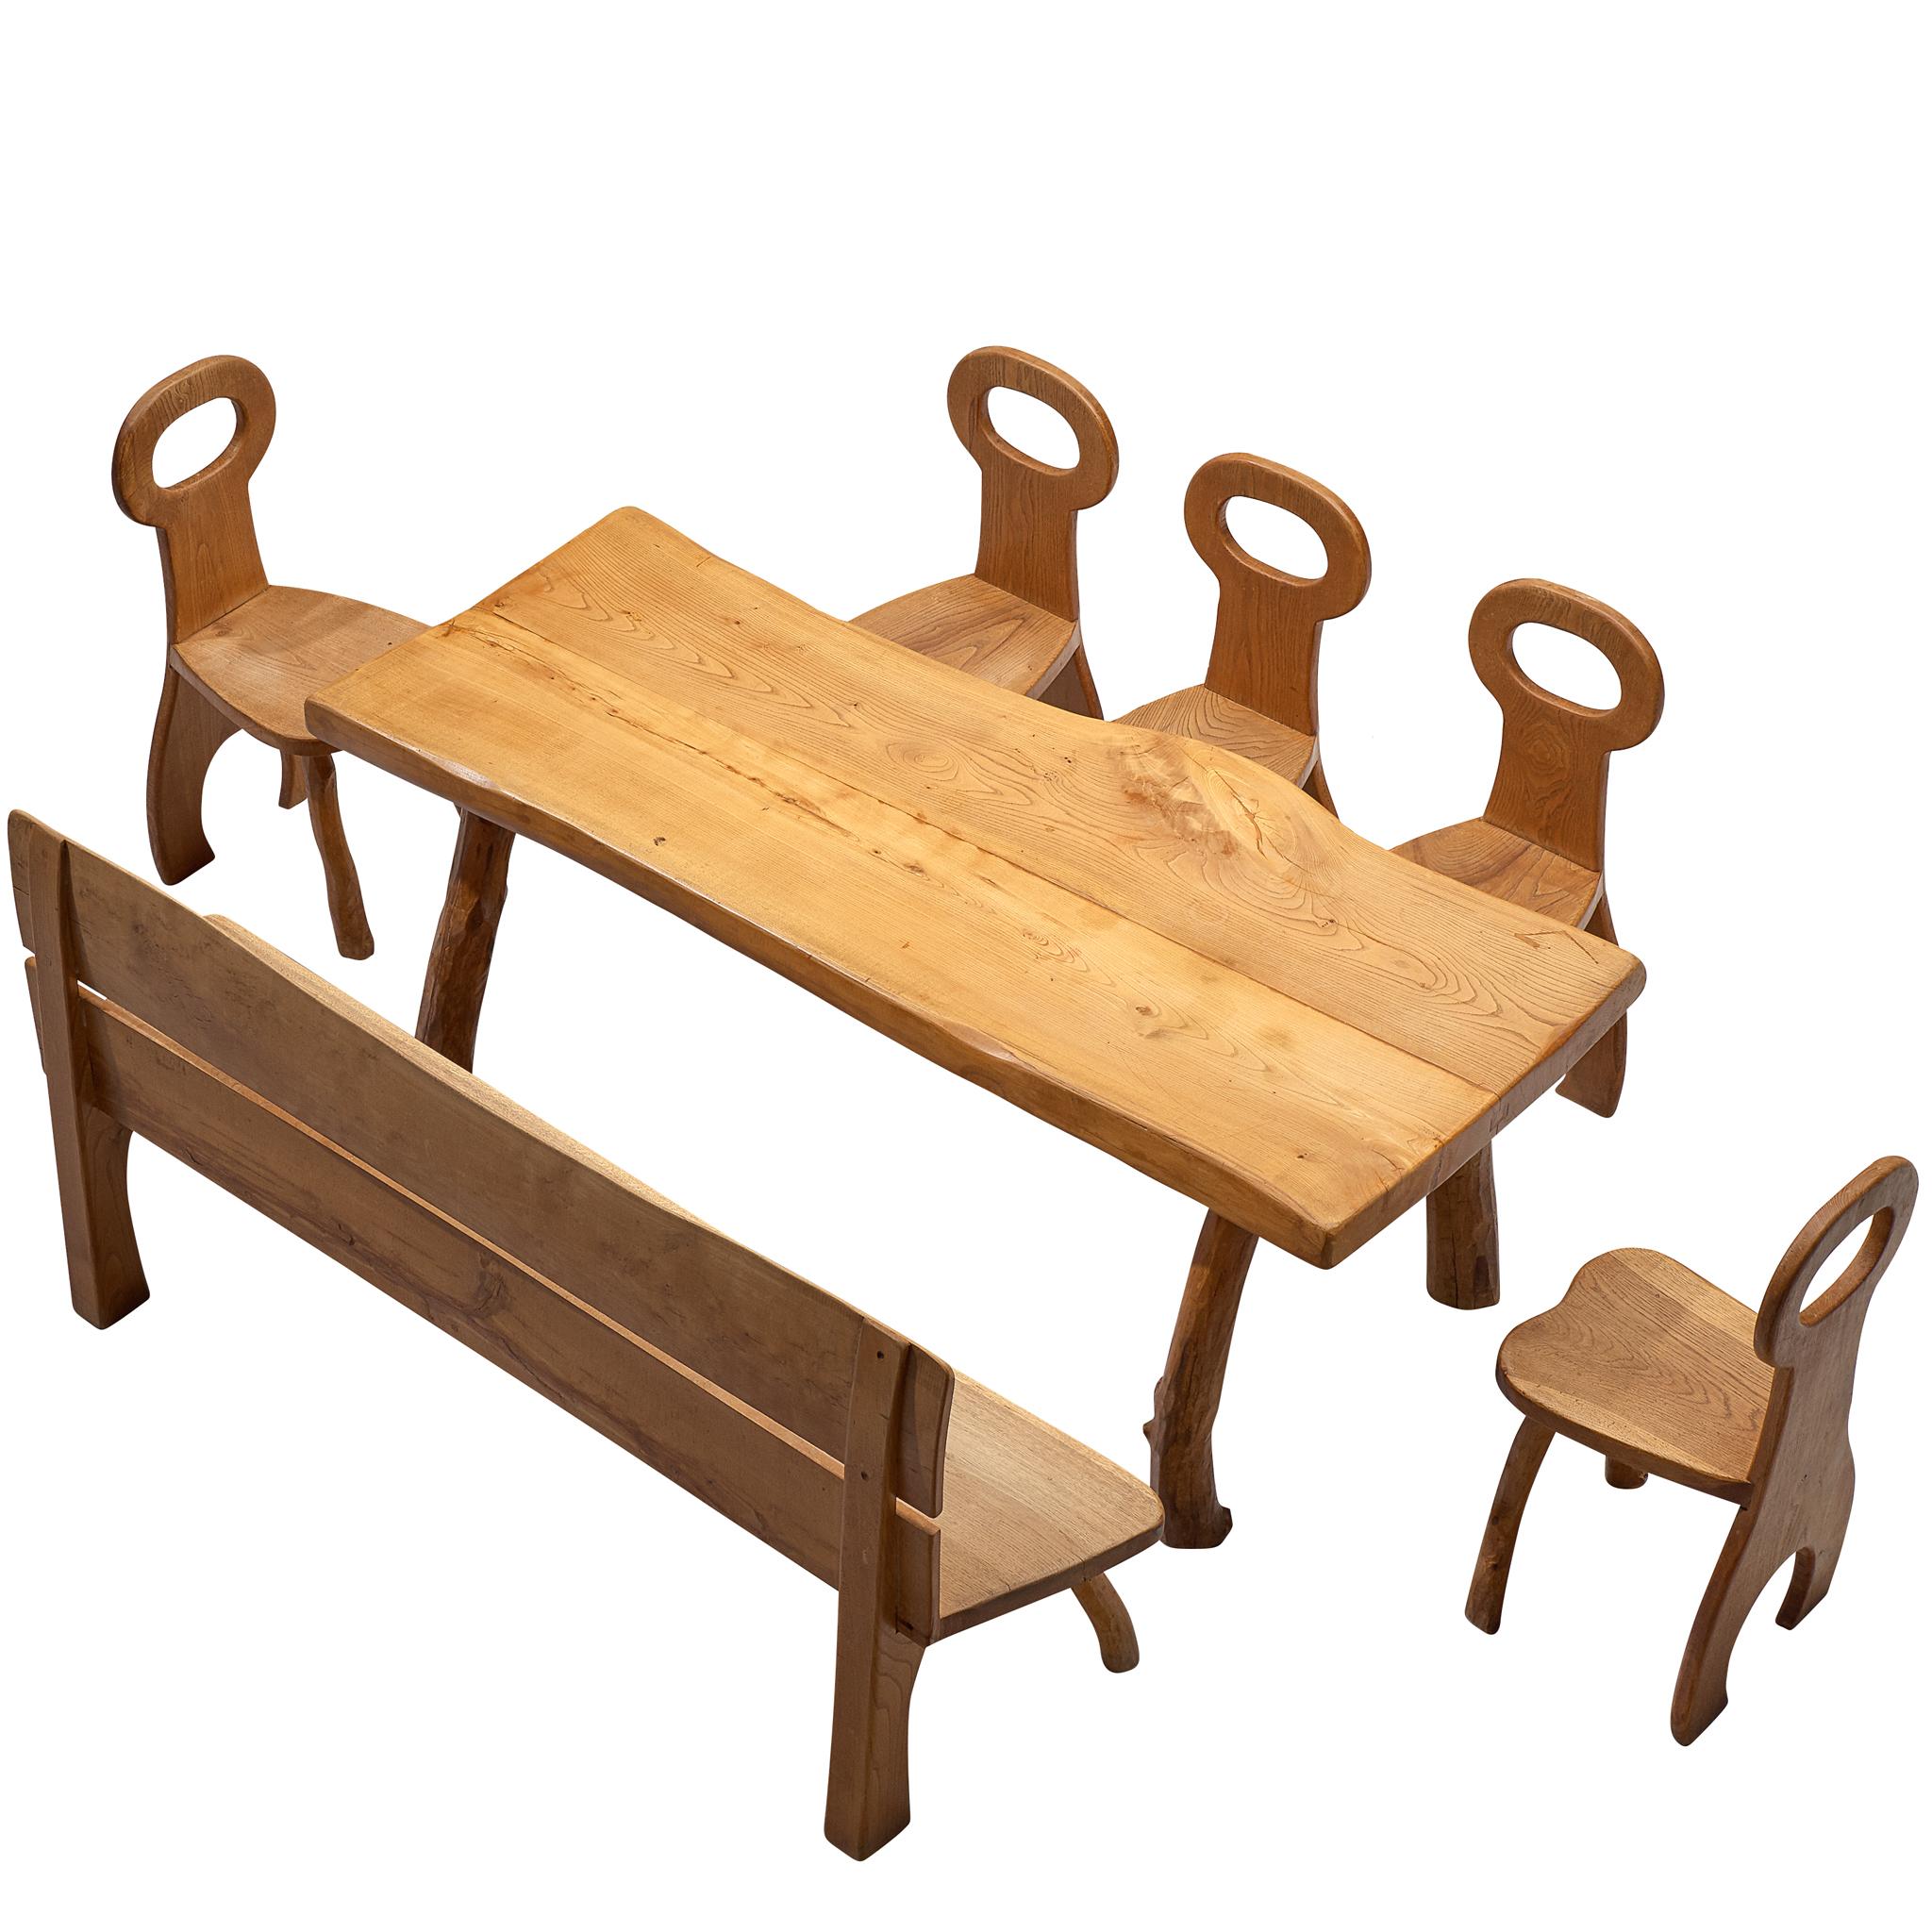 Dining room set, oak, France, 1960s.

Bulky oak wooden dining room set, consisting of a dining table, 5 chairs and one bench, that has robust design with organic elements. The pieces of furniture are all executed in solid oak that developed a